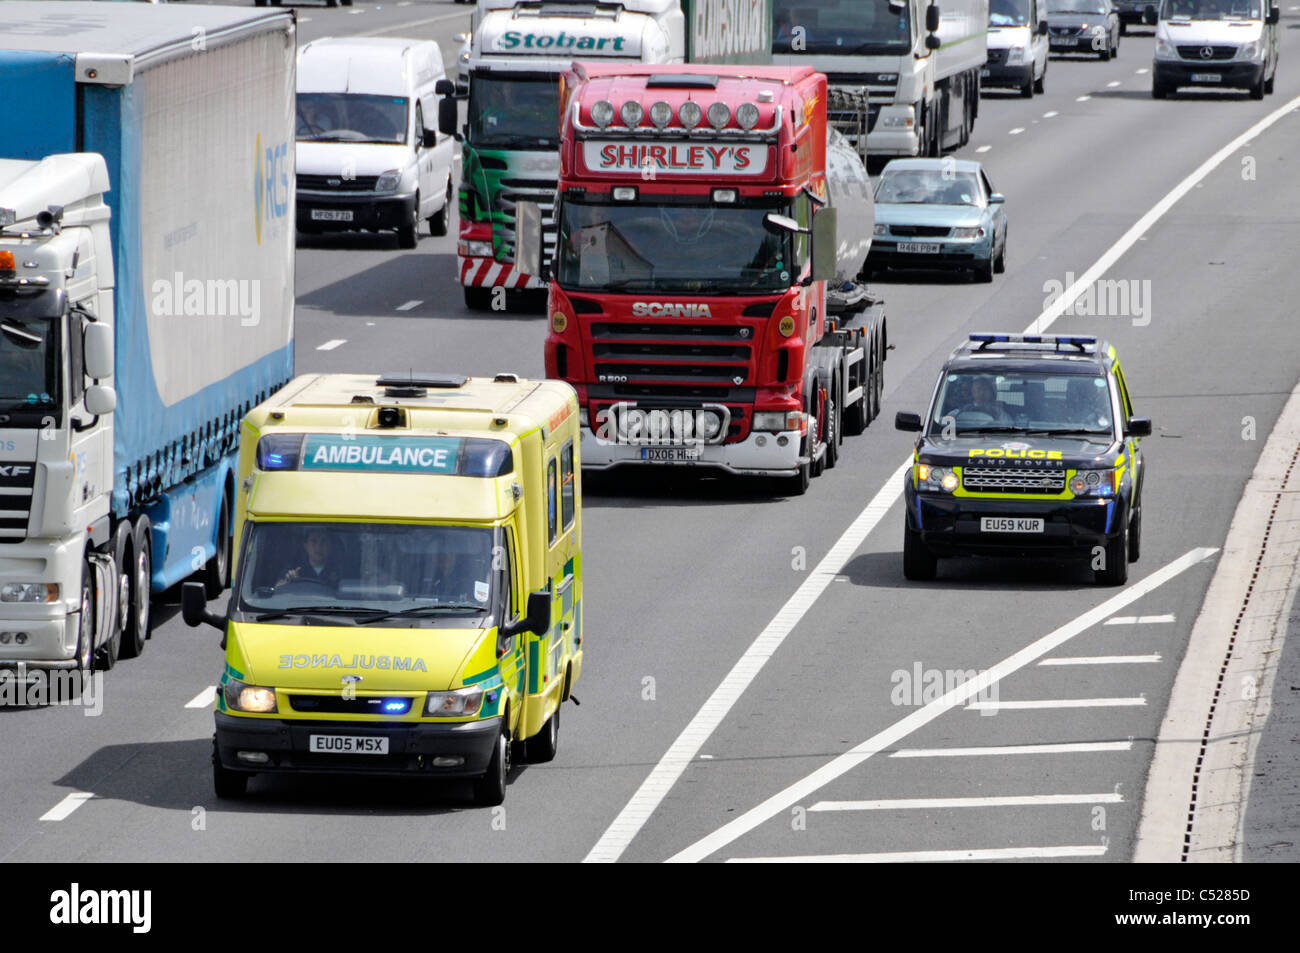 Emergency services lights on ambulance & police driver heavy motorway traffic on way to accident using lane one & hard shoulder M25 Essex England UK Stock Photo